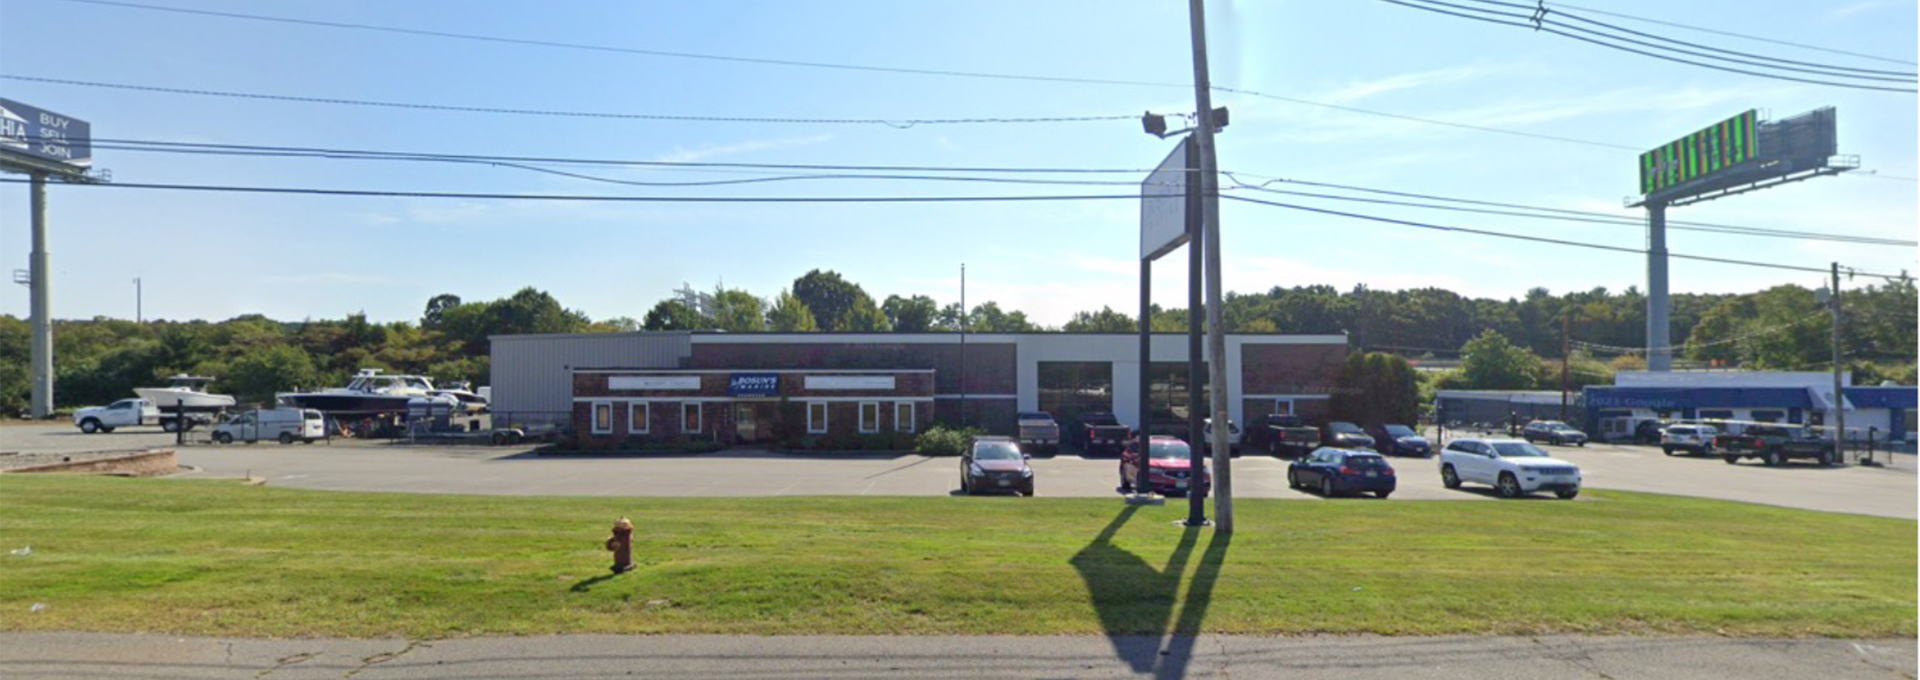 Store front image for the dealership located at Peabody, MA